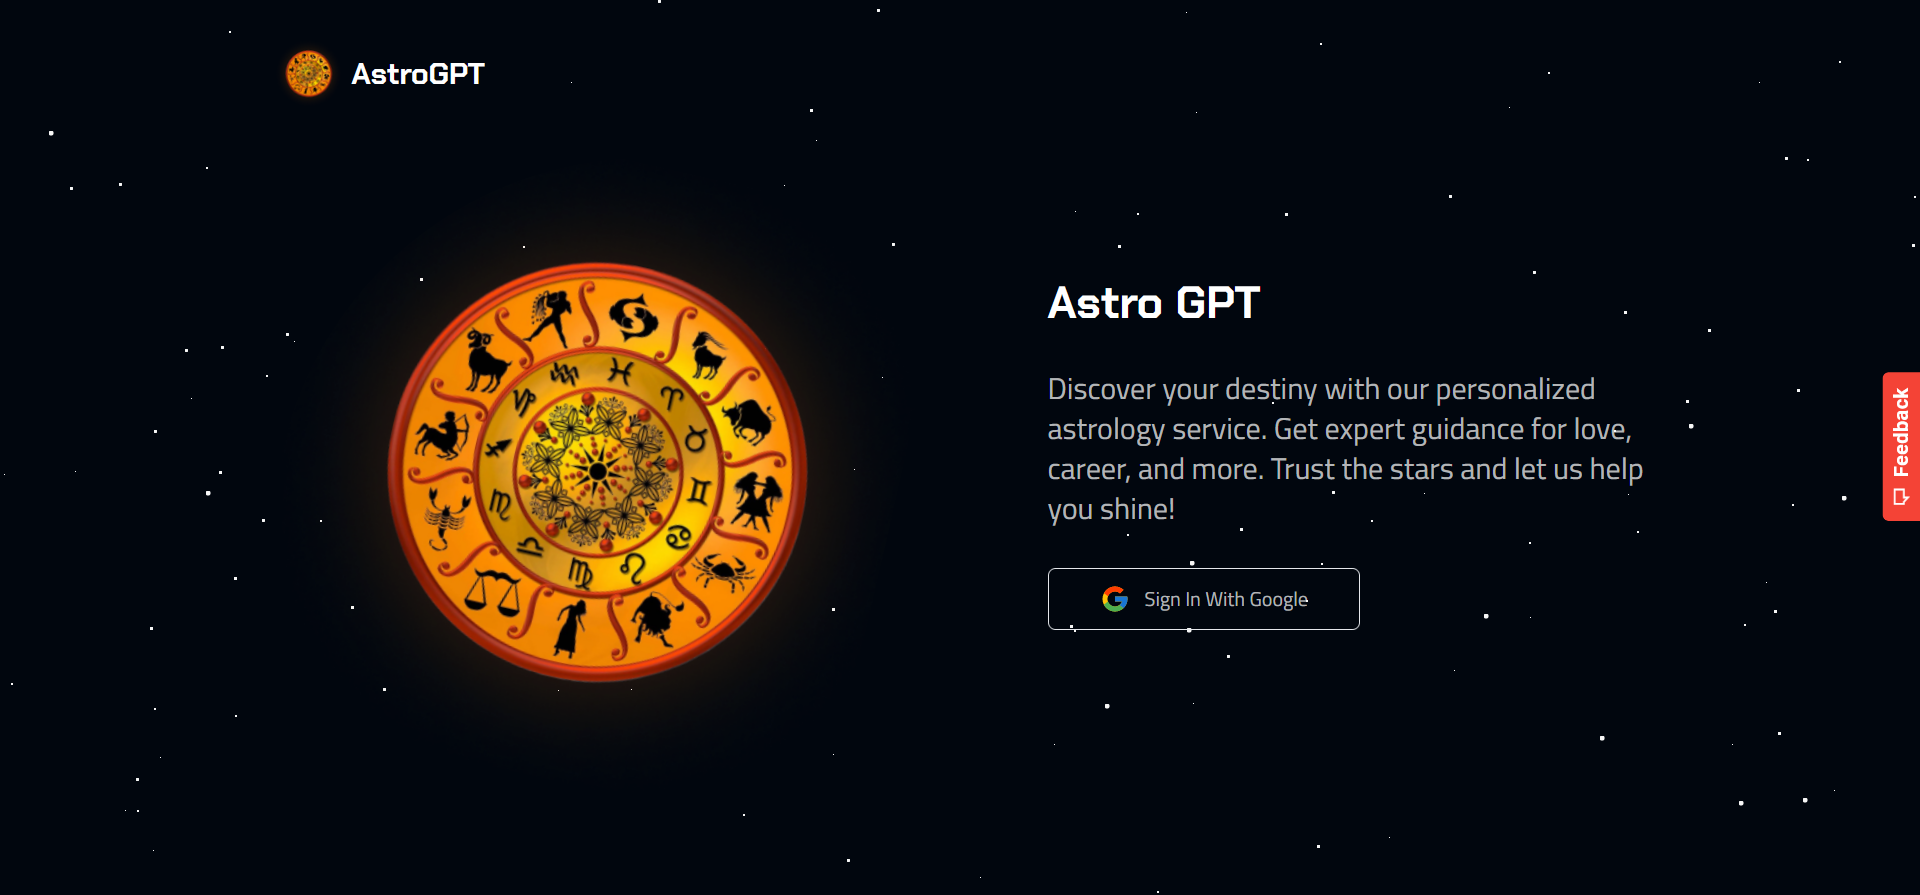  AstroGPT is a personalized astrology service that